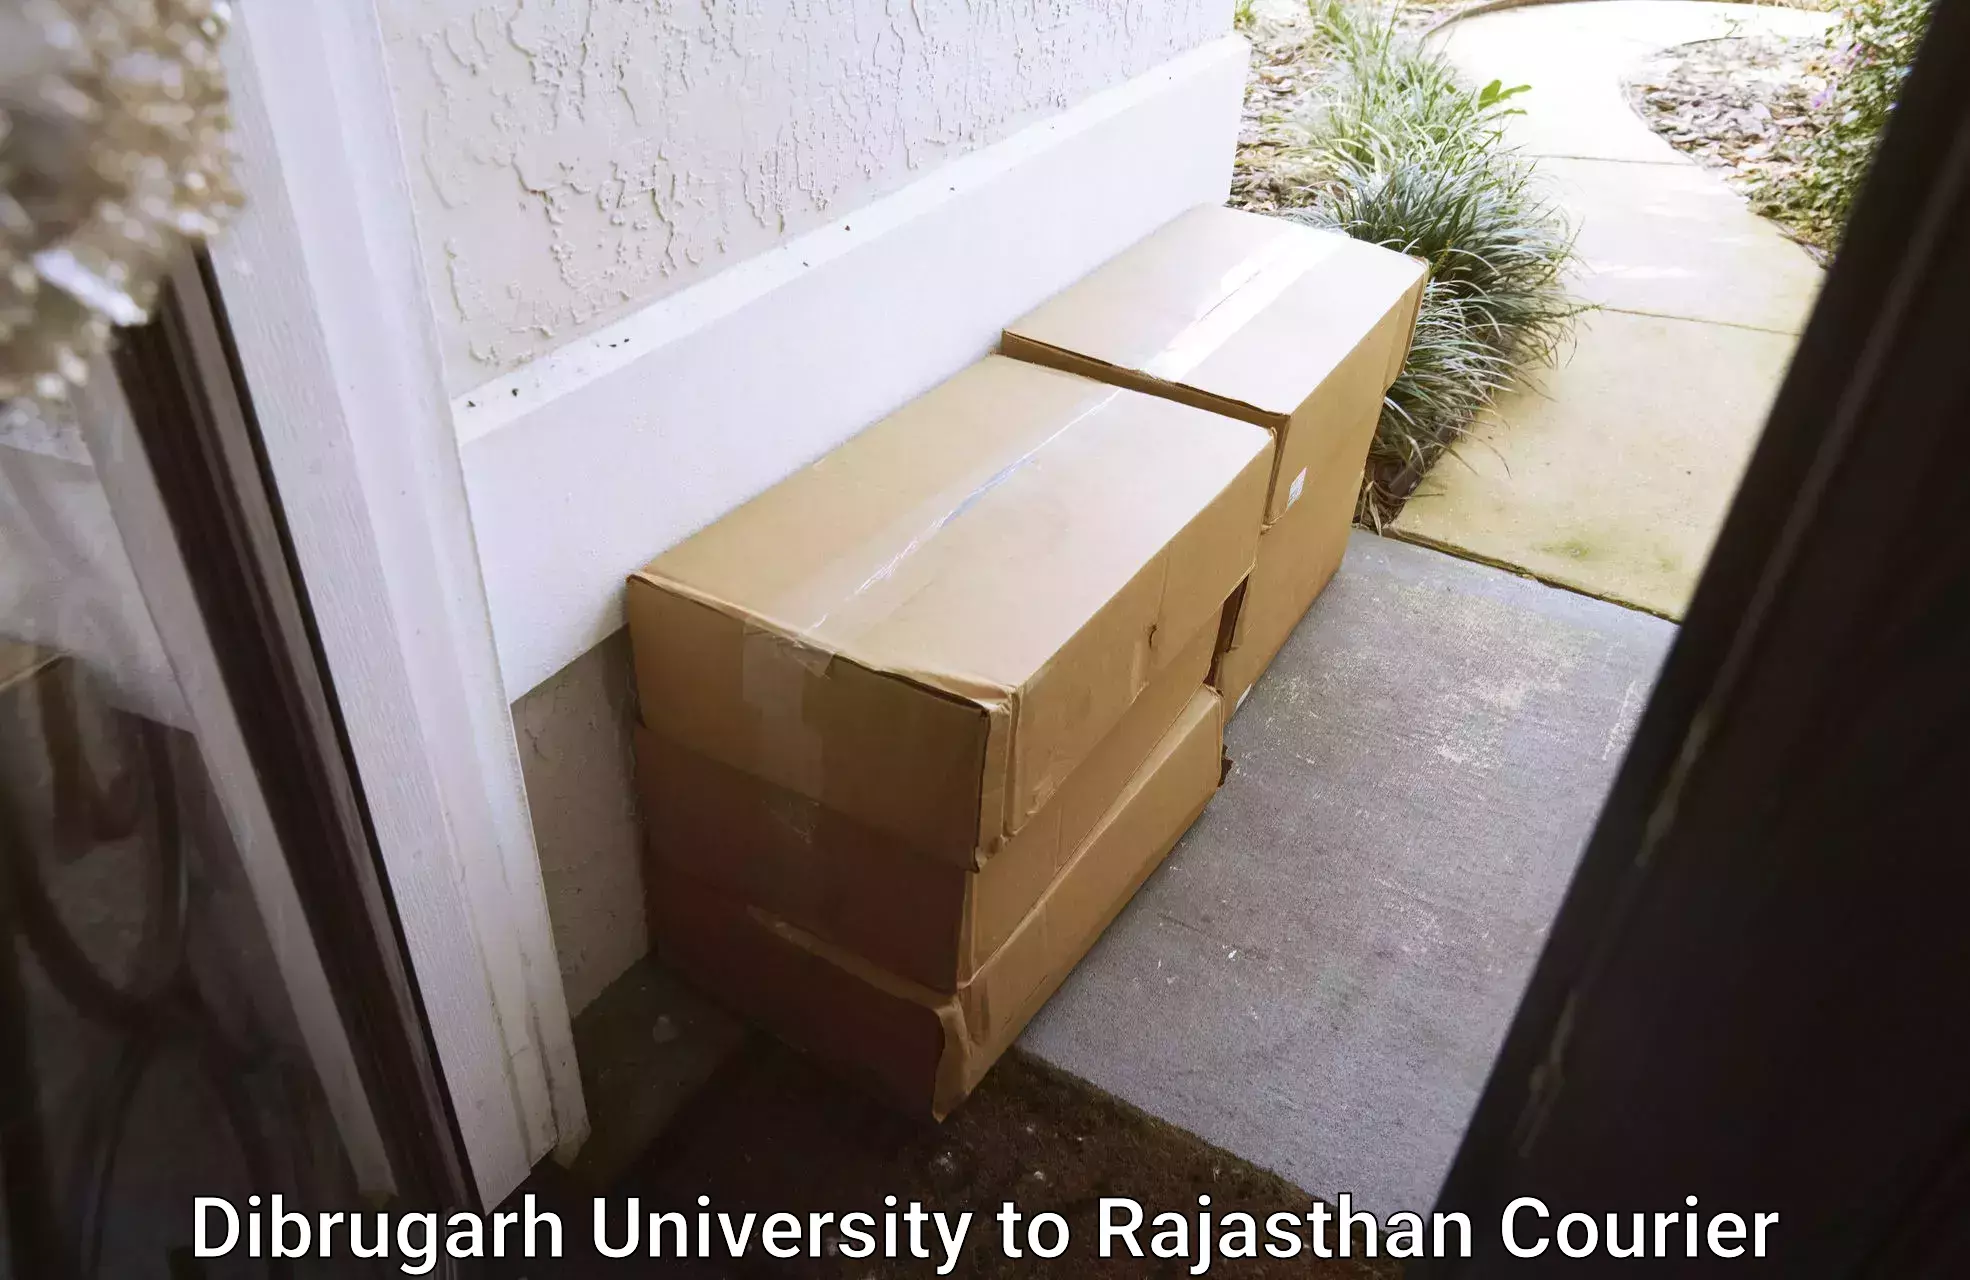 Delivery service partnership Dibrugarh University to Rajasthan